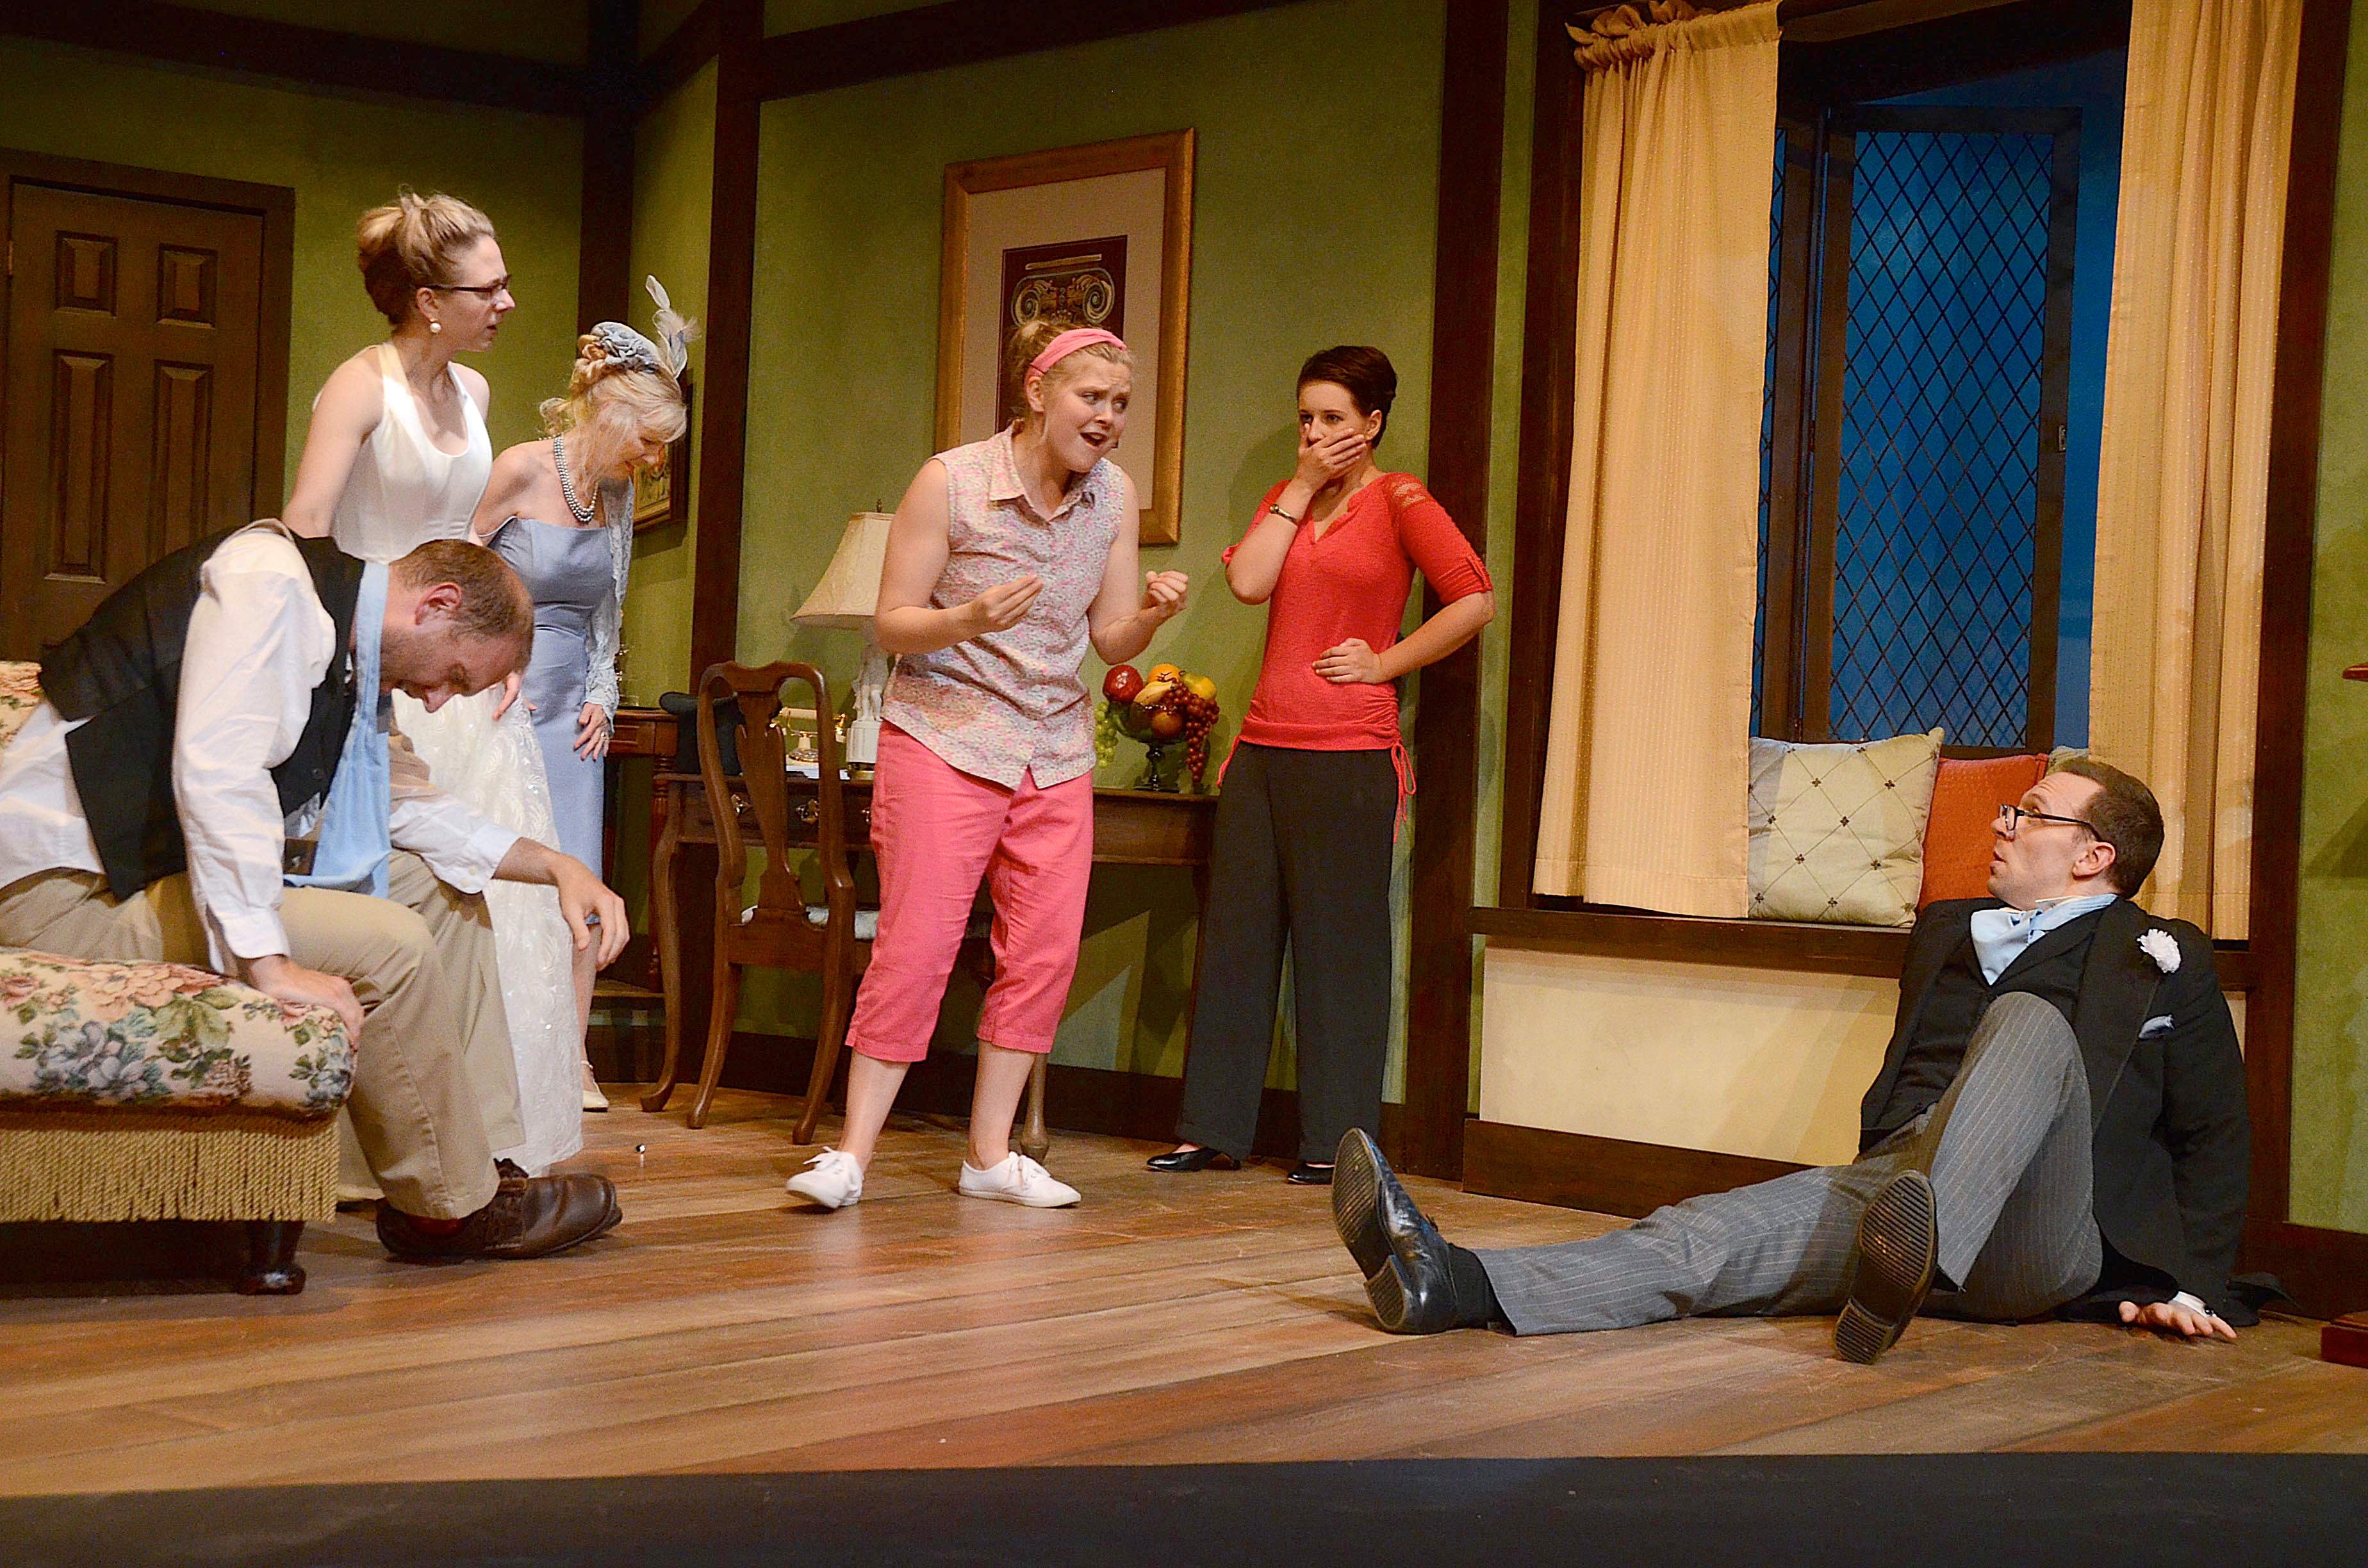 Perfect wedding? Of course not, when it’s a fast-paced British farce onstage at the VLT